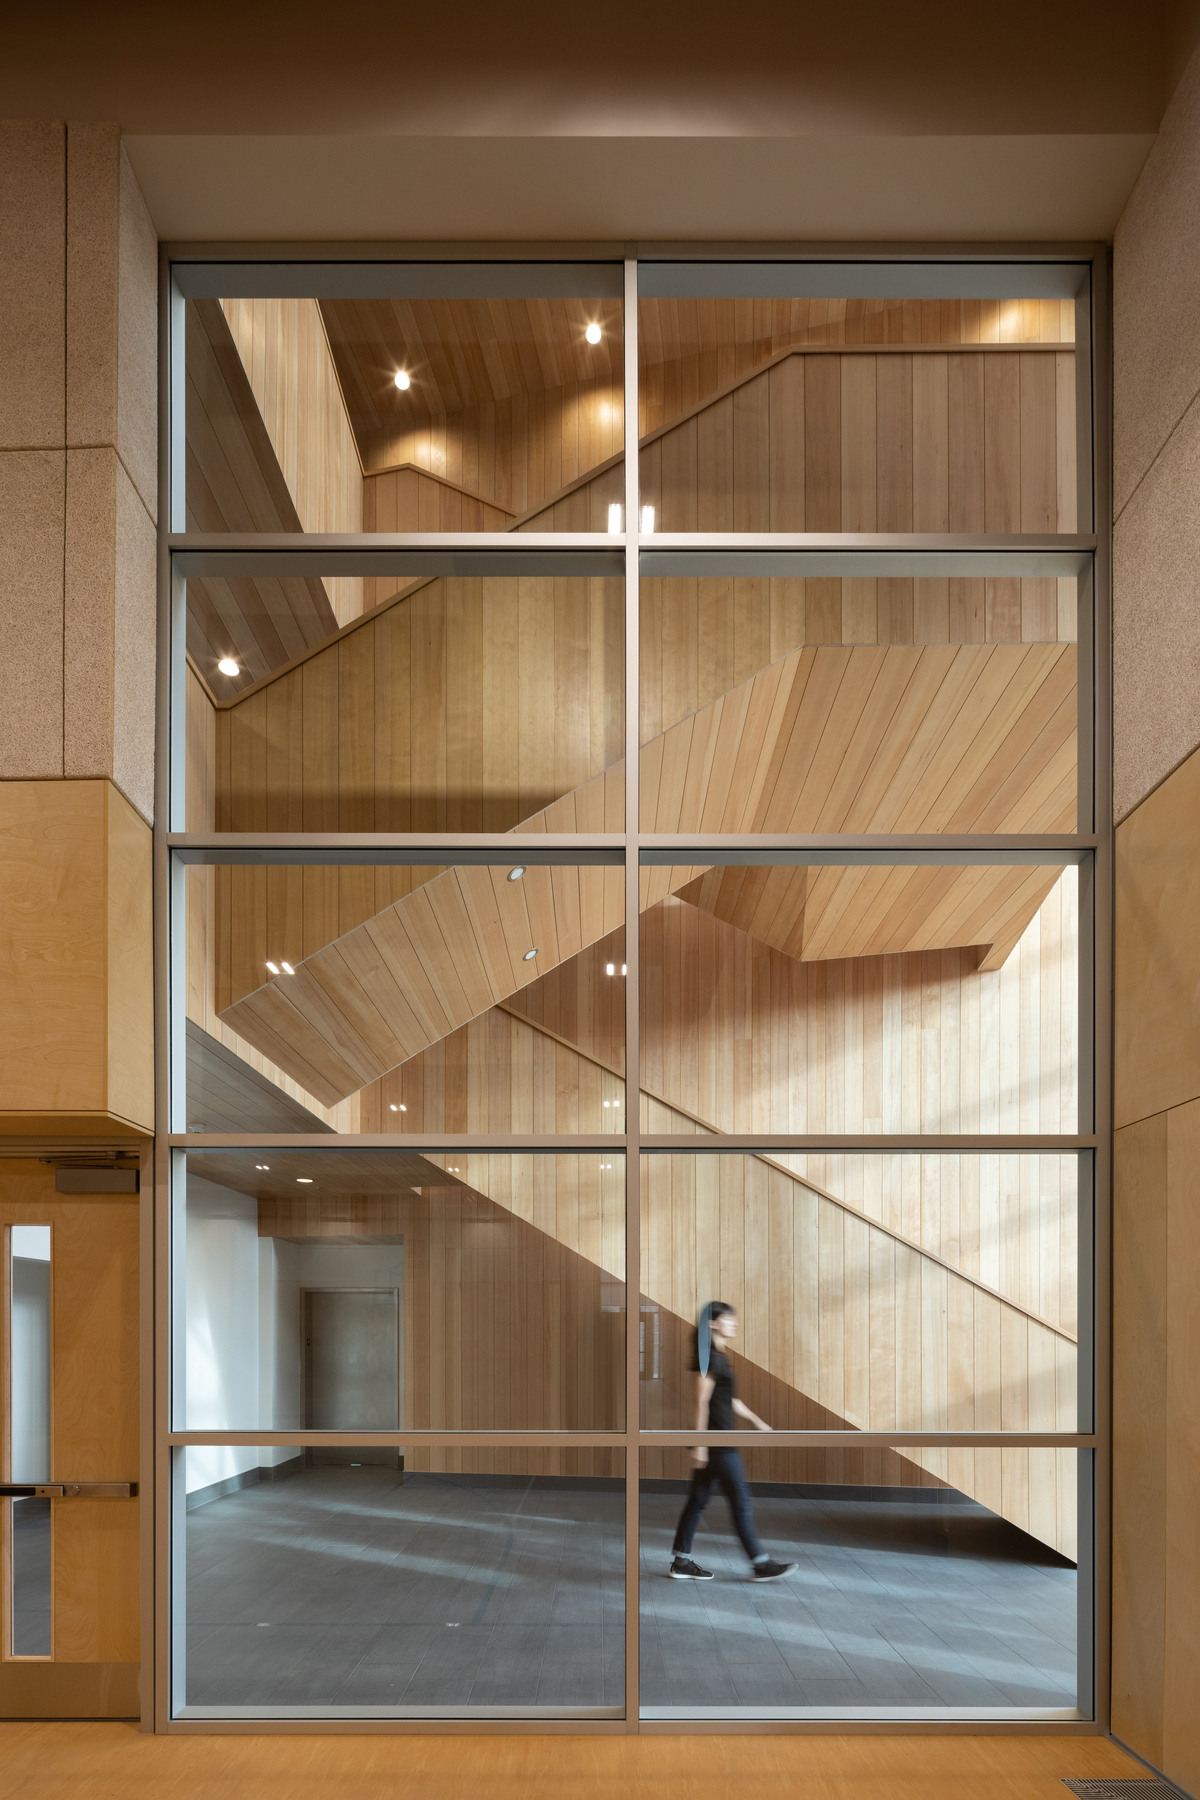 glue-laminated timber (glulam), lumber, millwork, nail-laminated timber (nlt), and paneling, are all featured in this interior daytime image of the Ts’kw’aylaxw Cultural and Community Health Centre which highlights the multi storey wooden switchback staircase